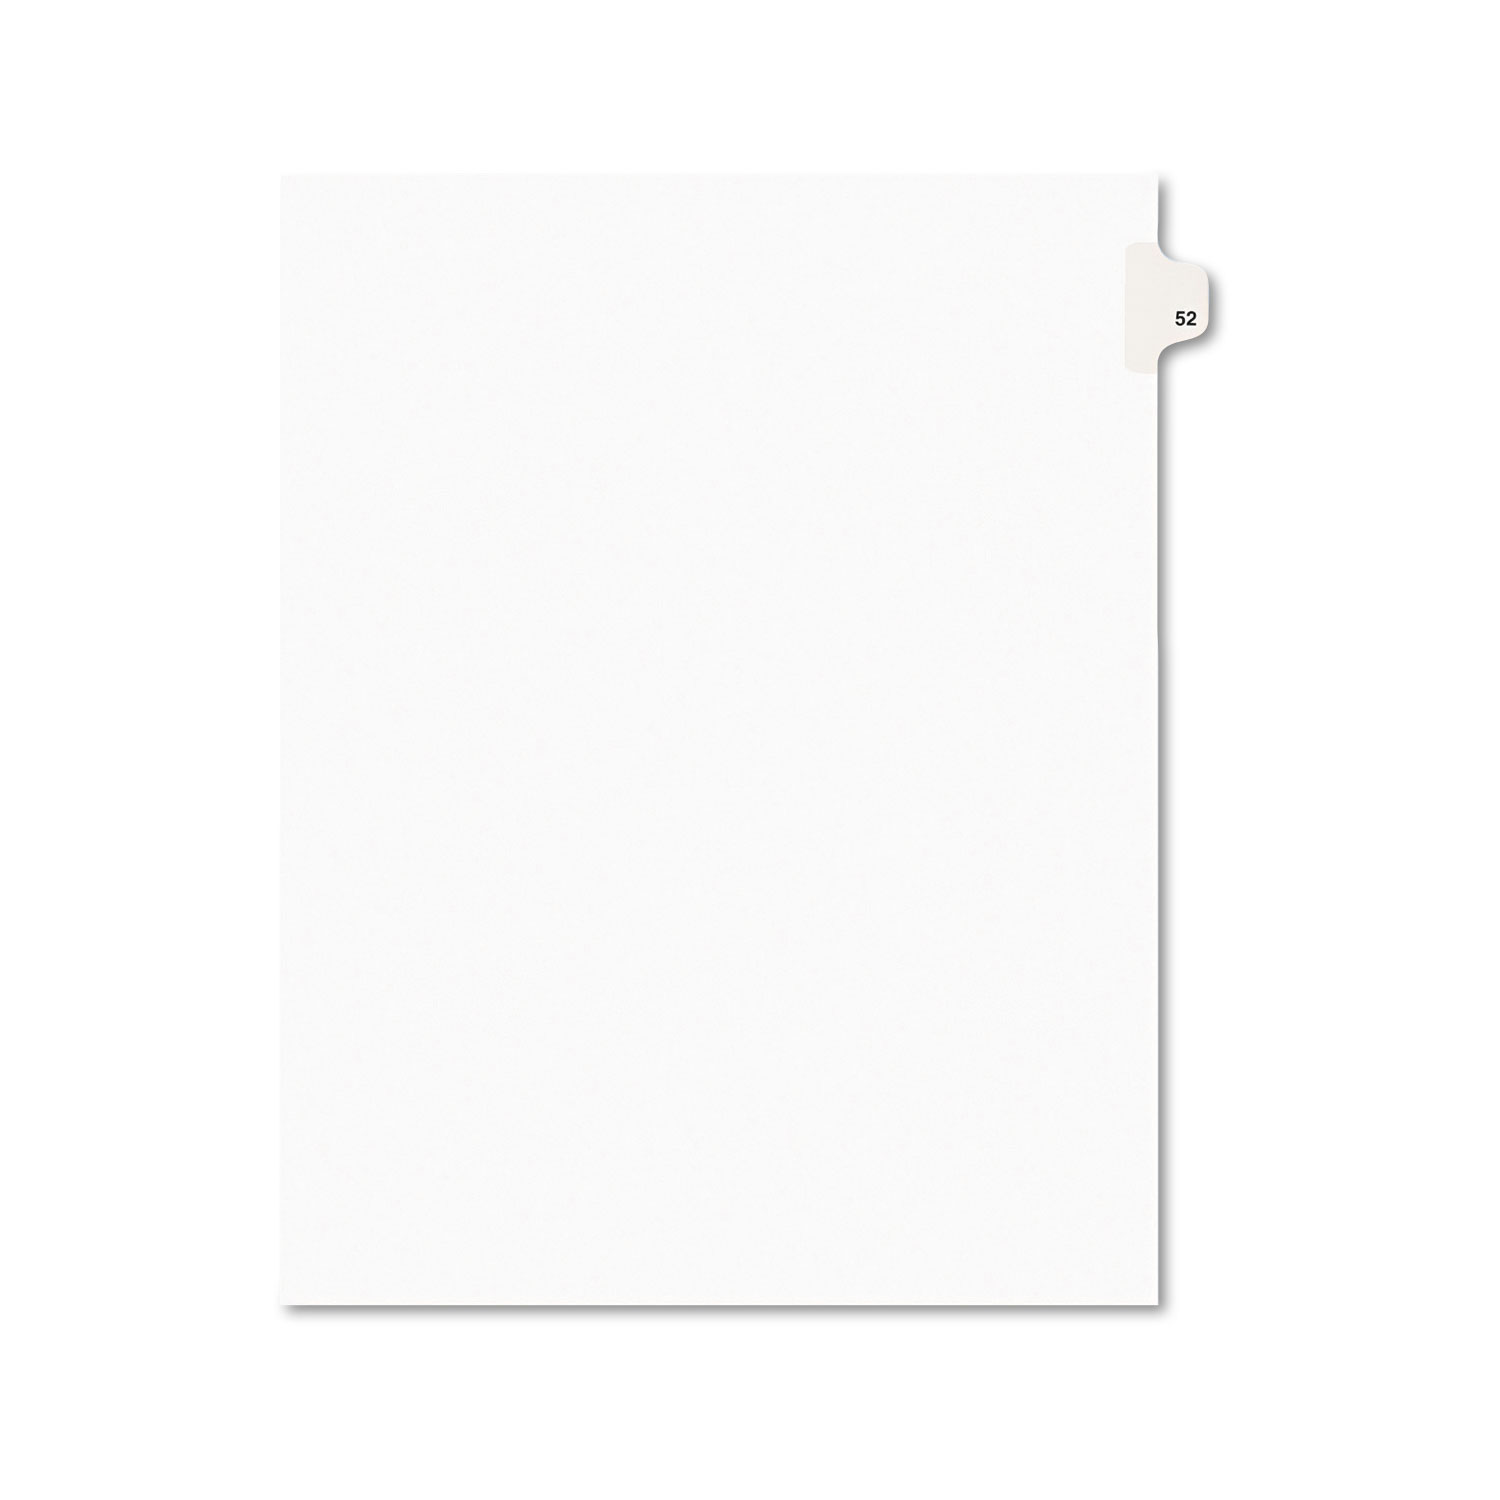  Avery 01052 Preprinted Legal Exhibit Side Tab Index Dividers, Avery Style, 10-Tab, 52, 11 x 8.5, White, 25/Pack (AVE01052) 